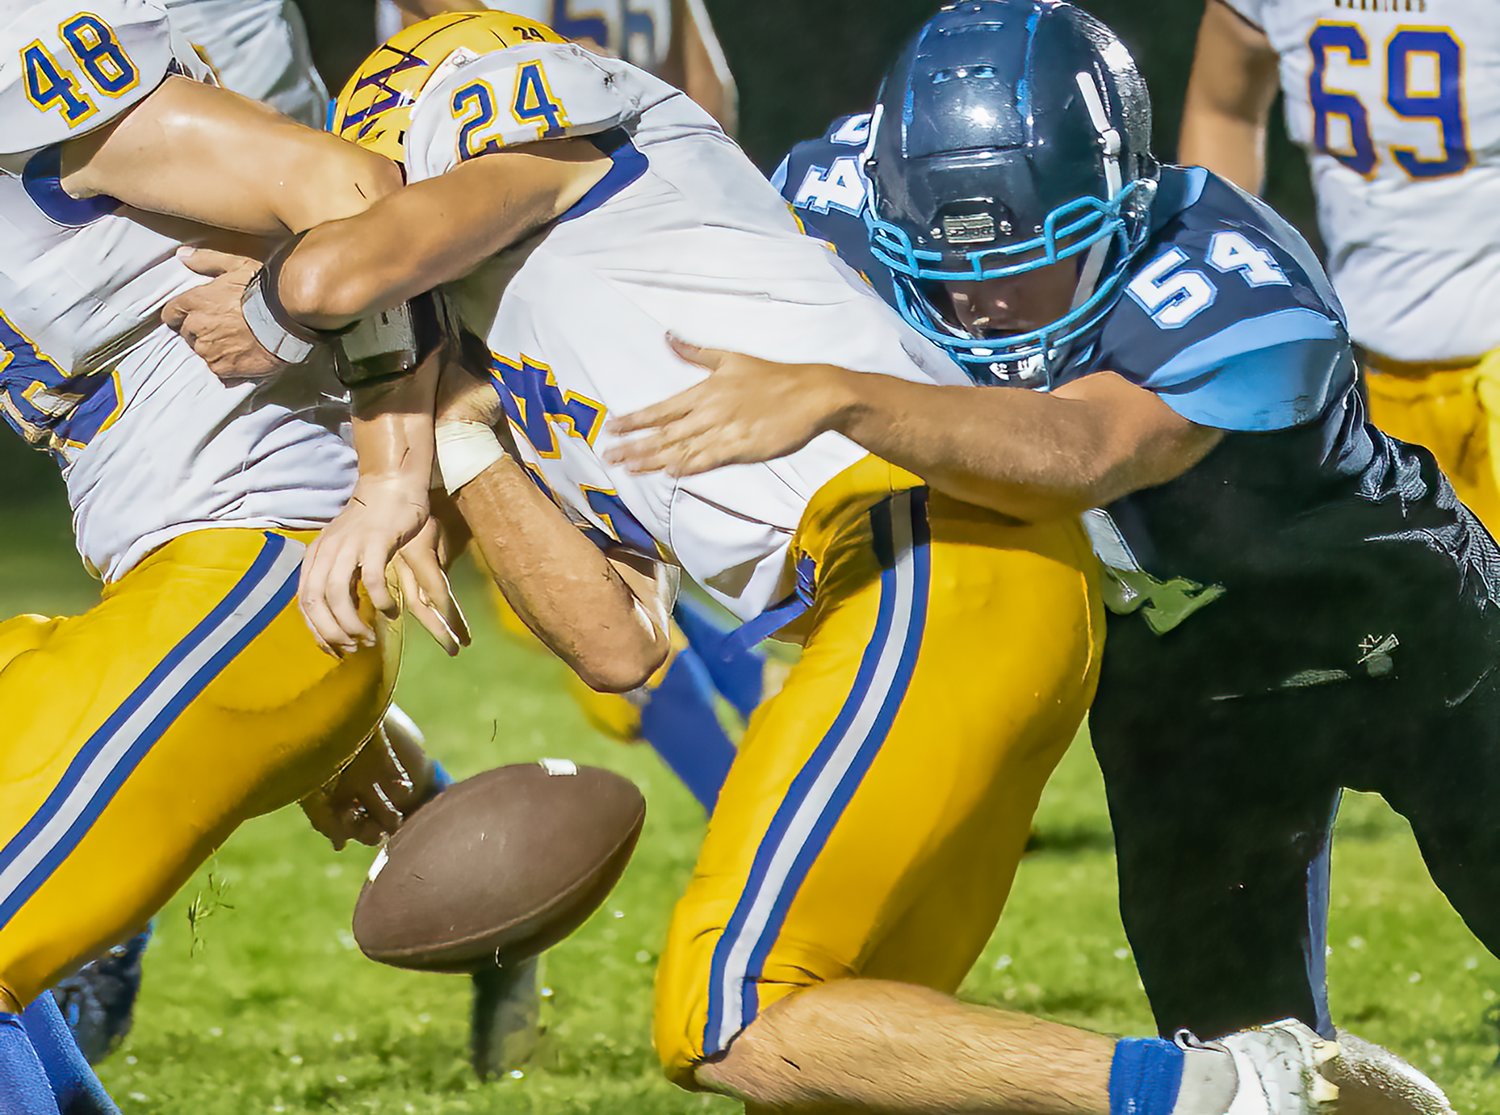 The Grizzlies’ Noah Westman forces a Deer River ball handler to fumble during action last Friday at North Woods.